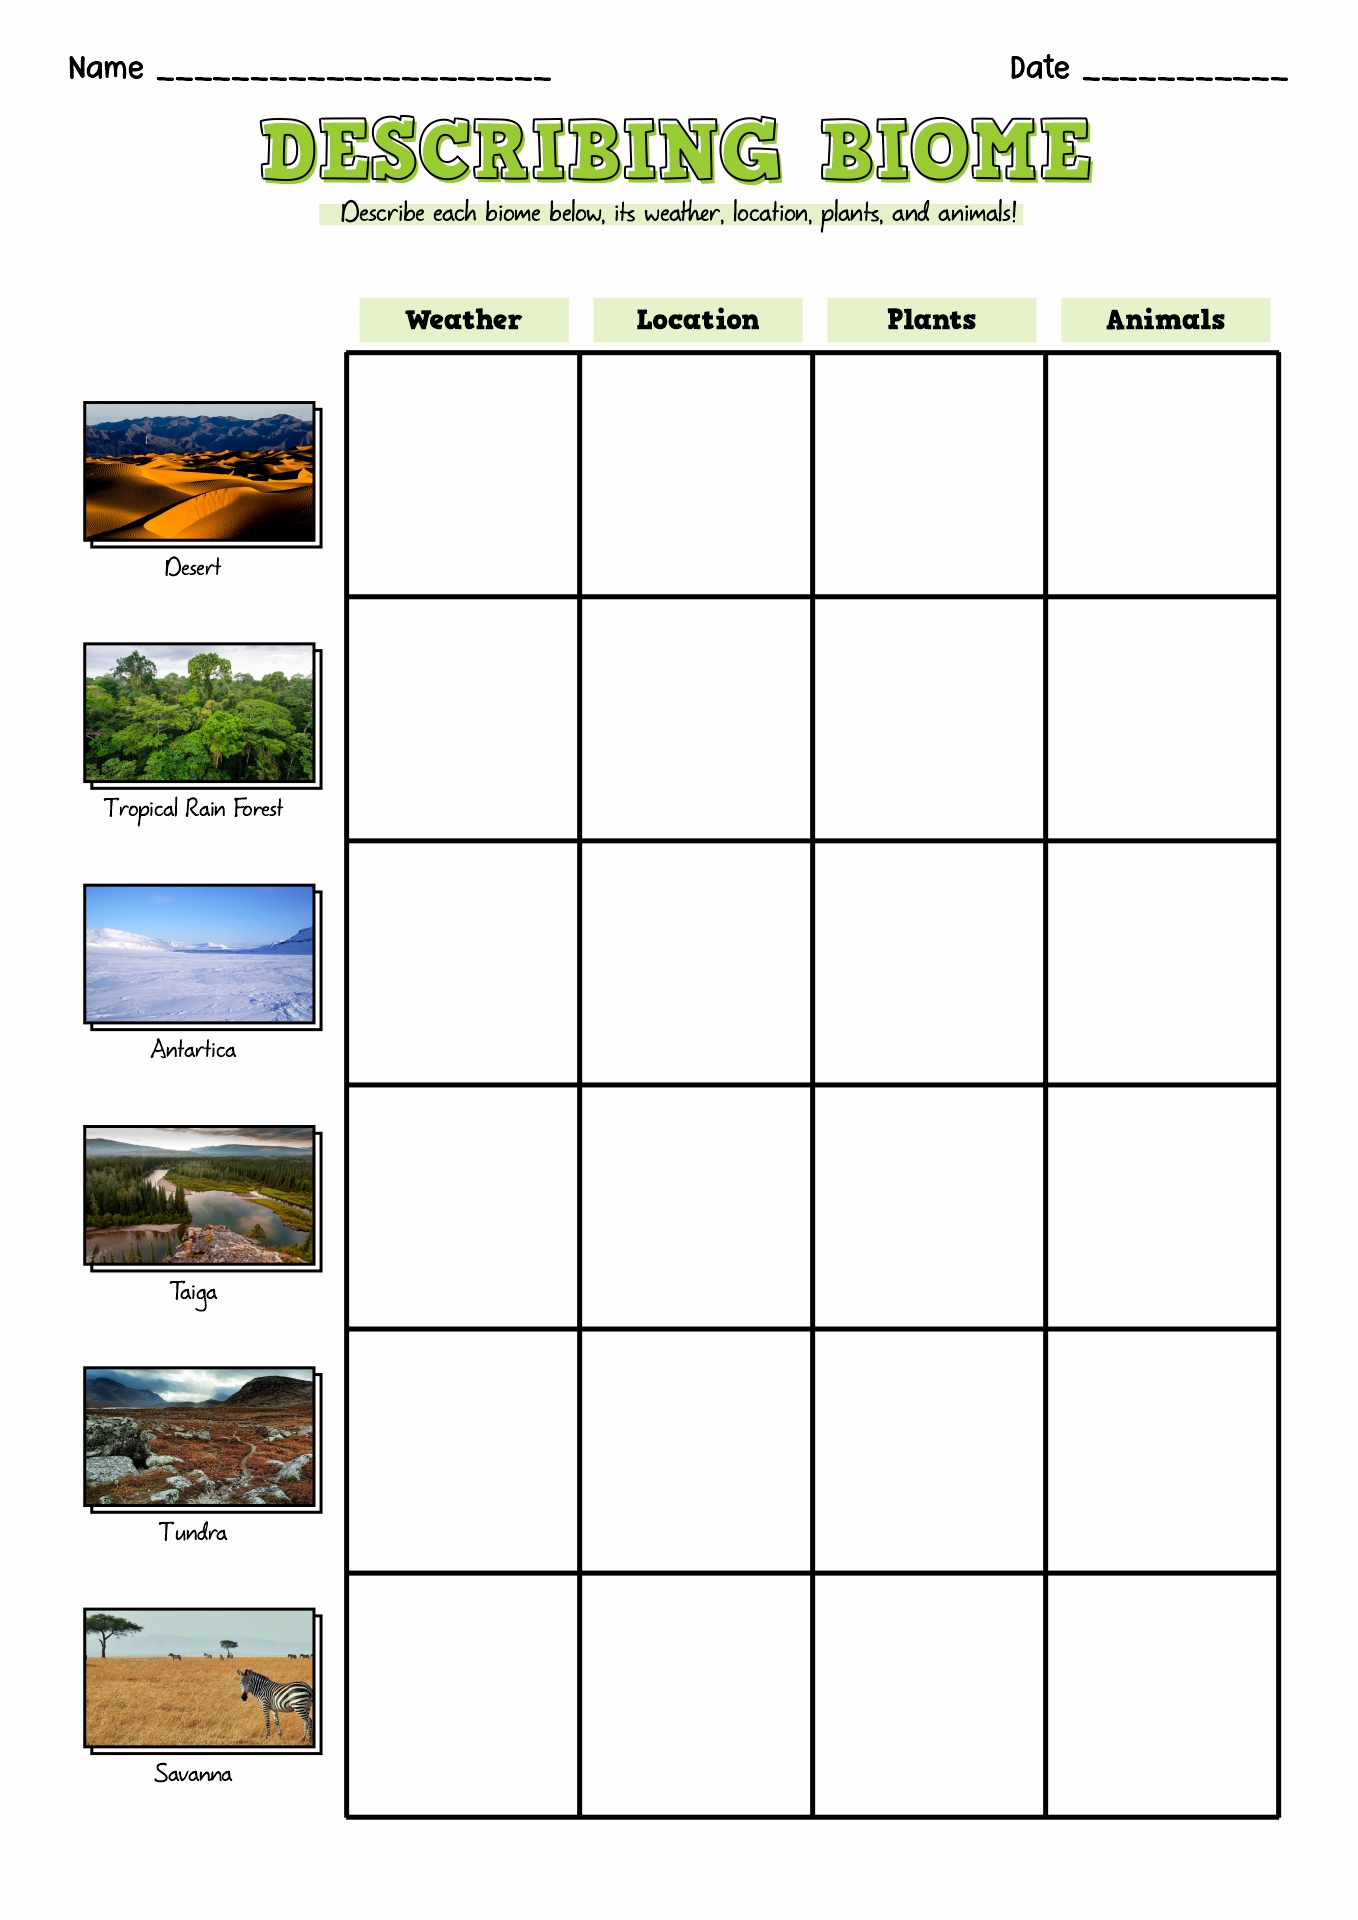 biome research project worksheet